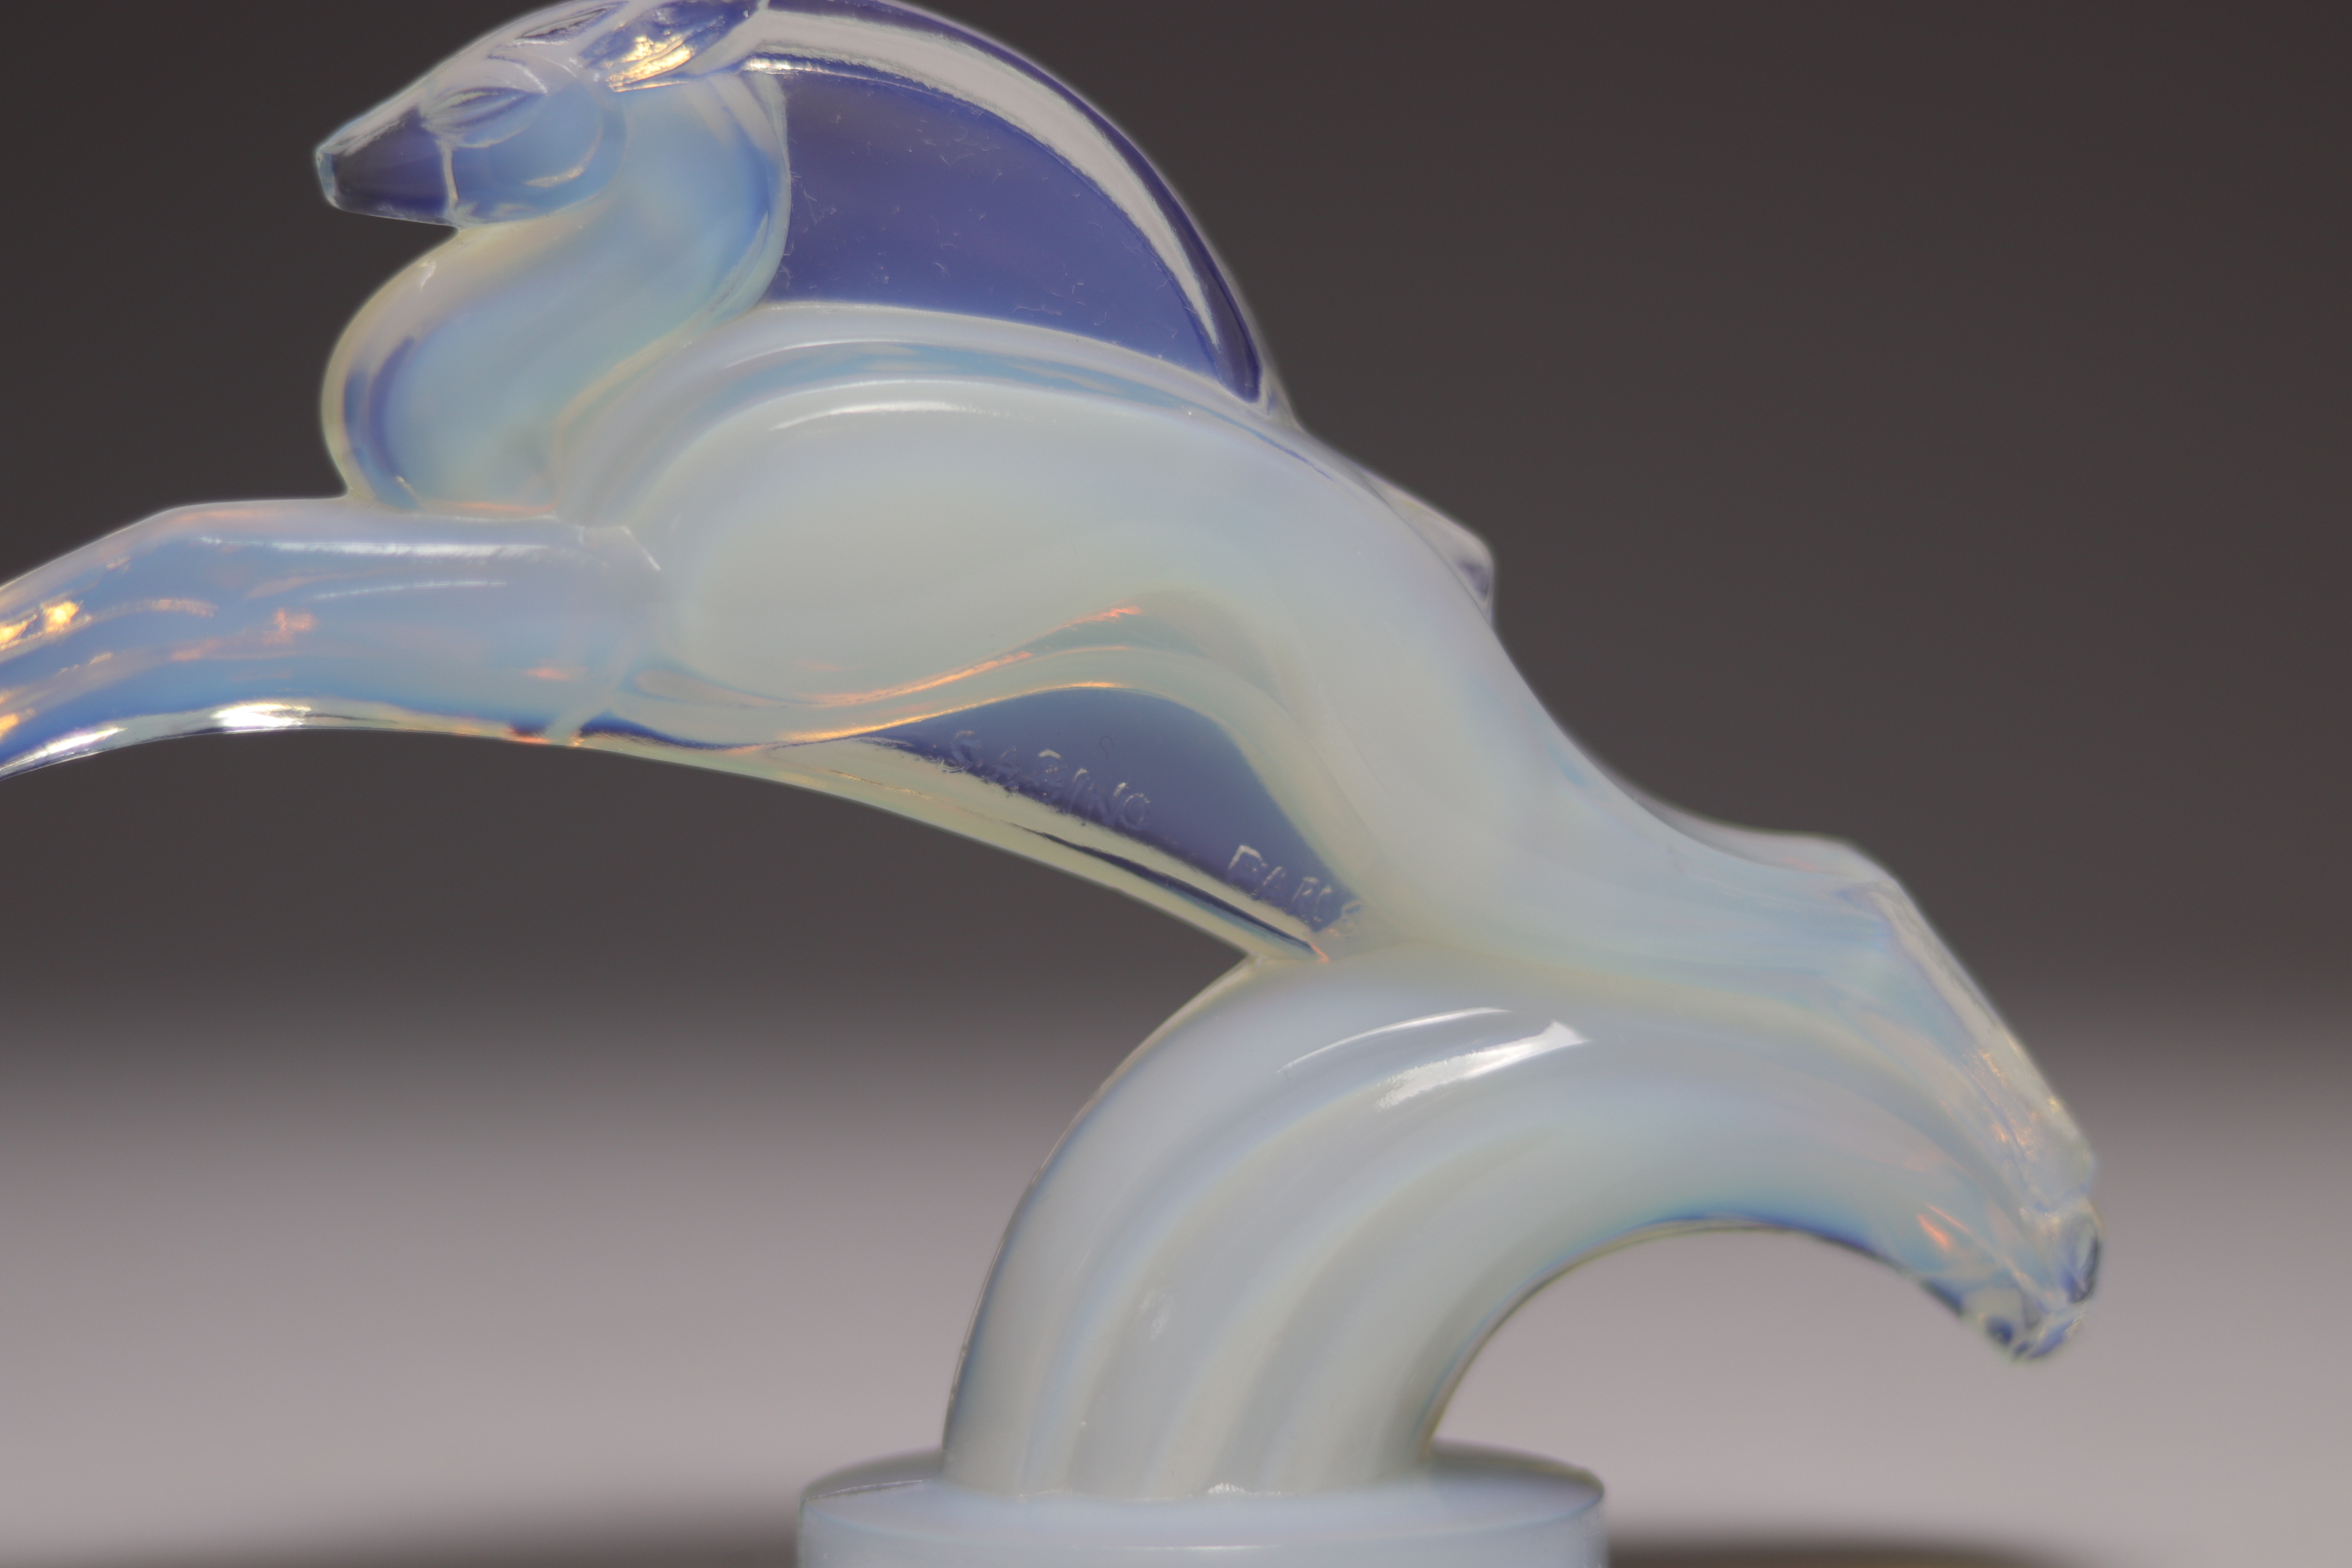 Sabino leaping gazelle in opalescent glass - Image 4 of 4